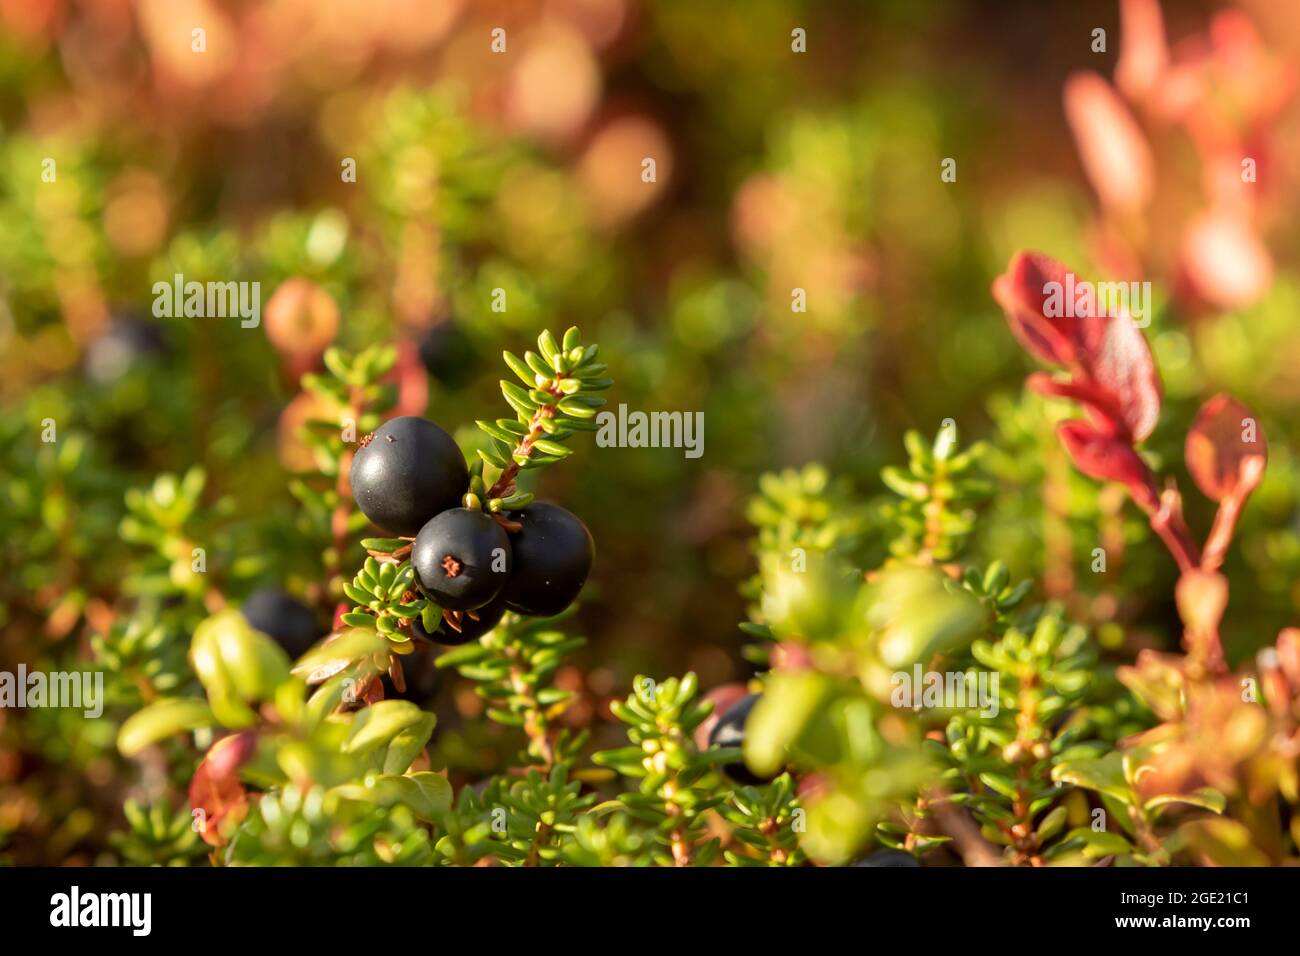 Ripe berries of crowberry (Empetrum nigrum) ready for picking during autumn in Finnish nature Stock Photo